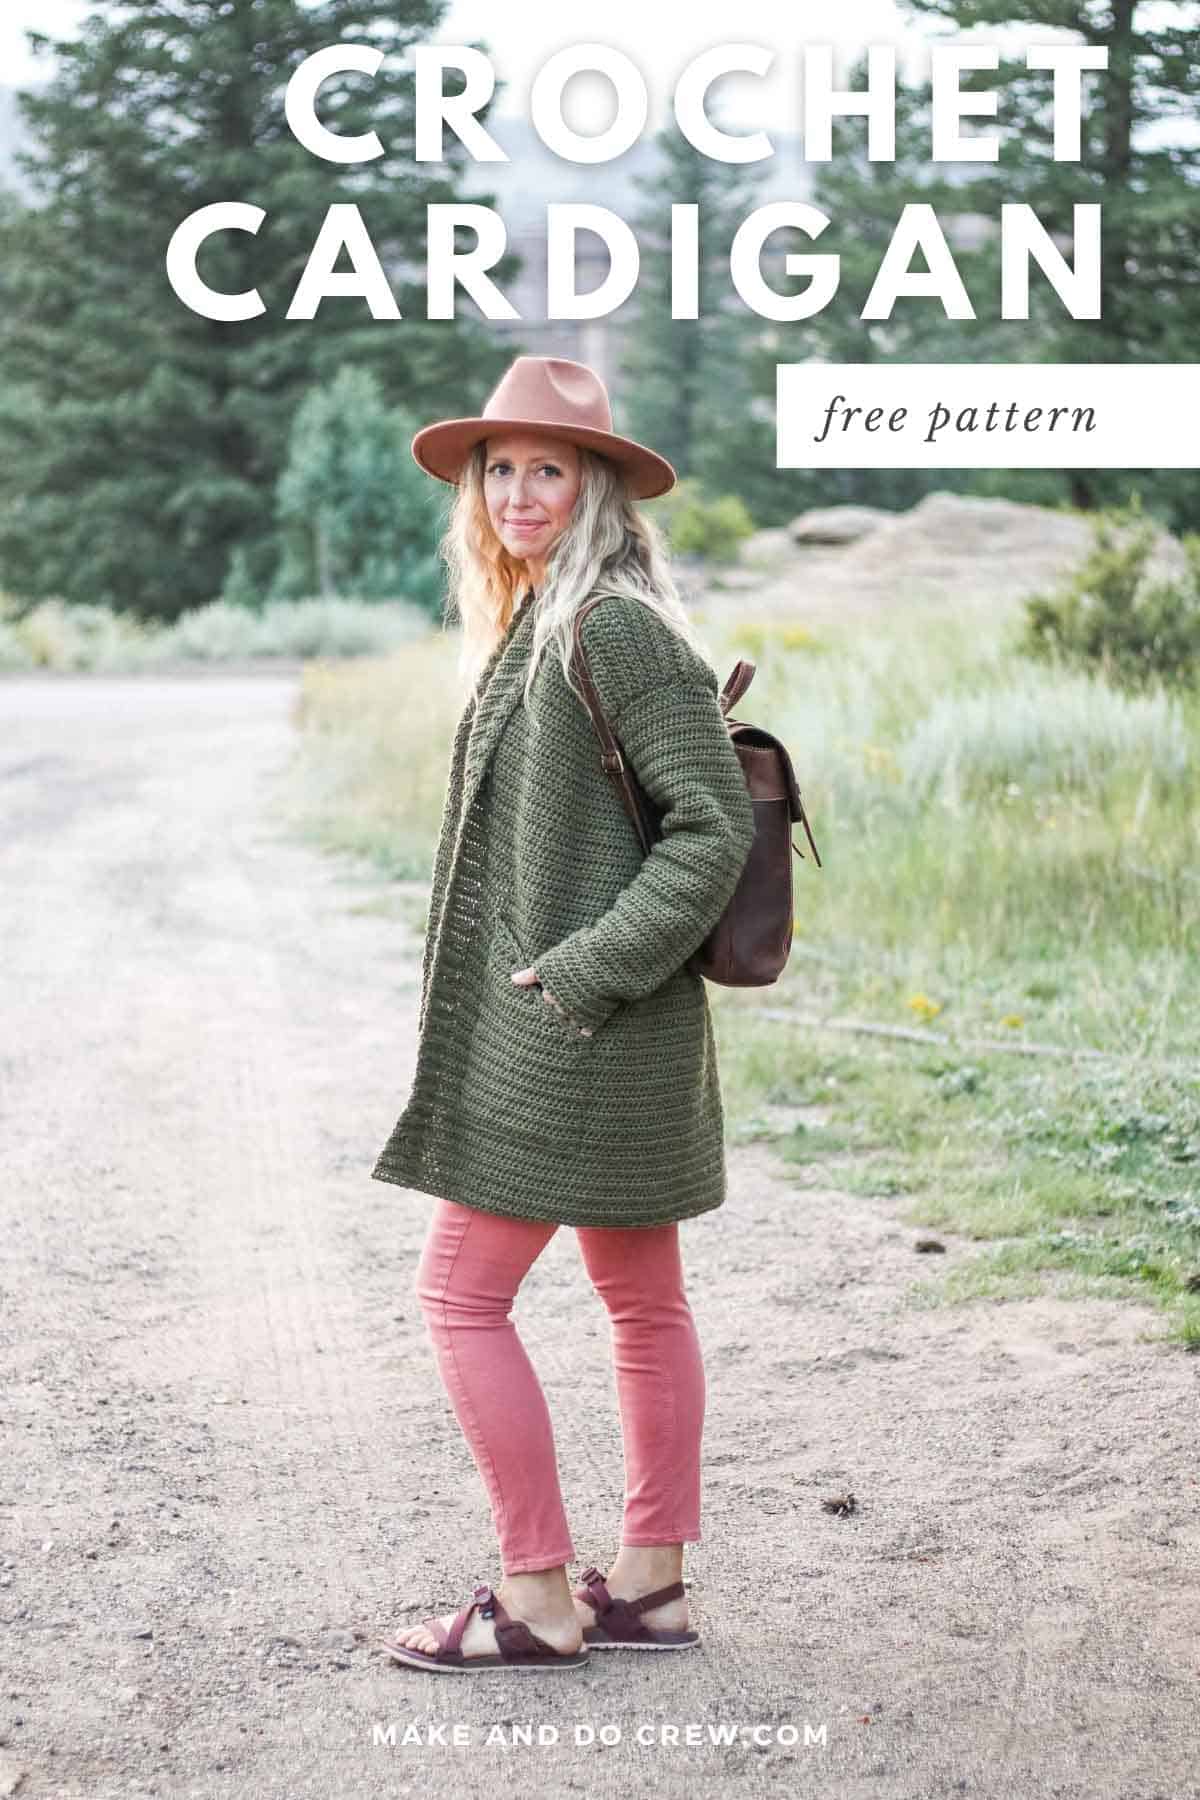 A woman wearing a fedora hat, an olive green crochet sweater with her hands in the pockets, and a brown leather backpack.